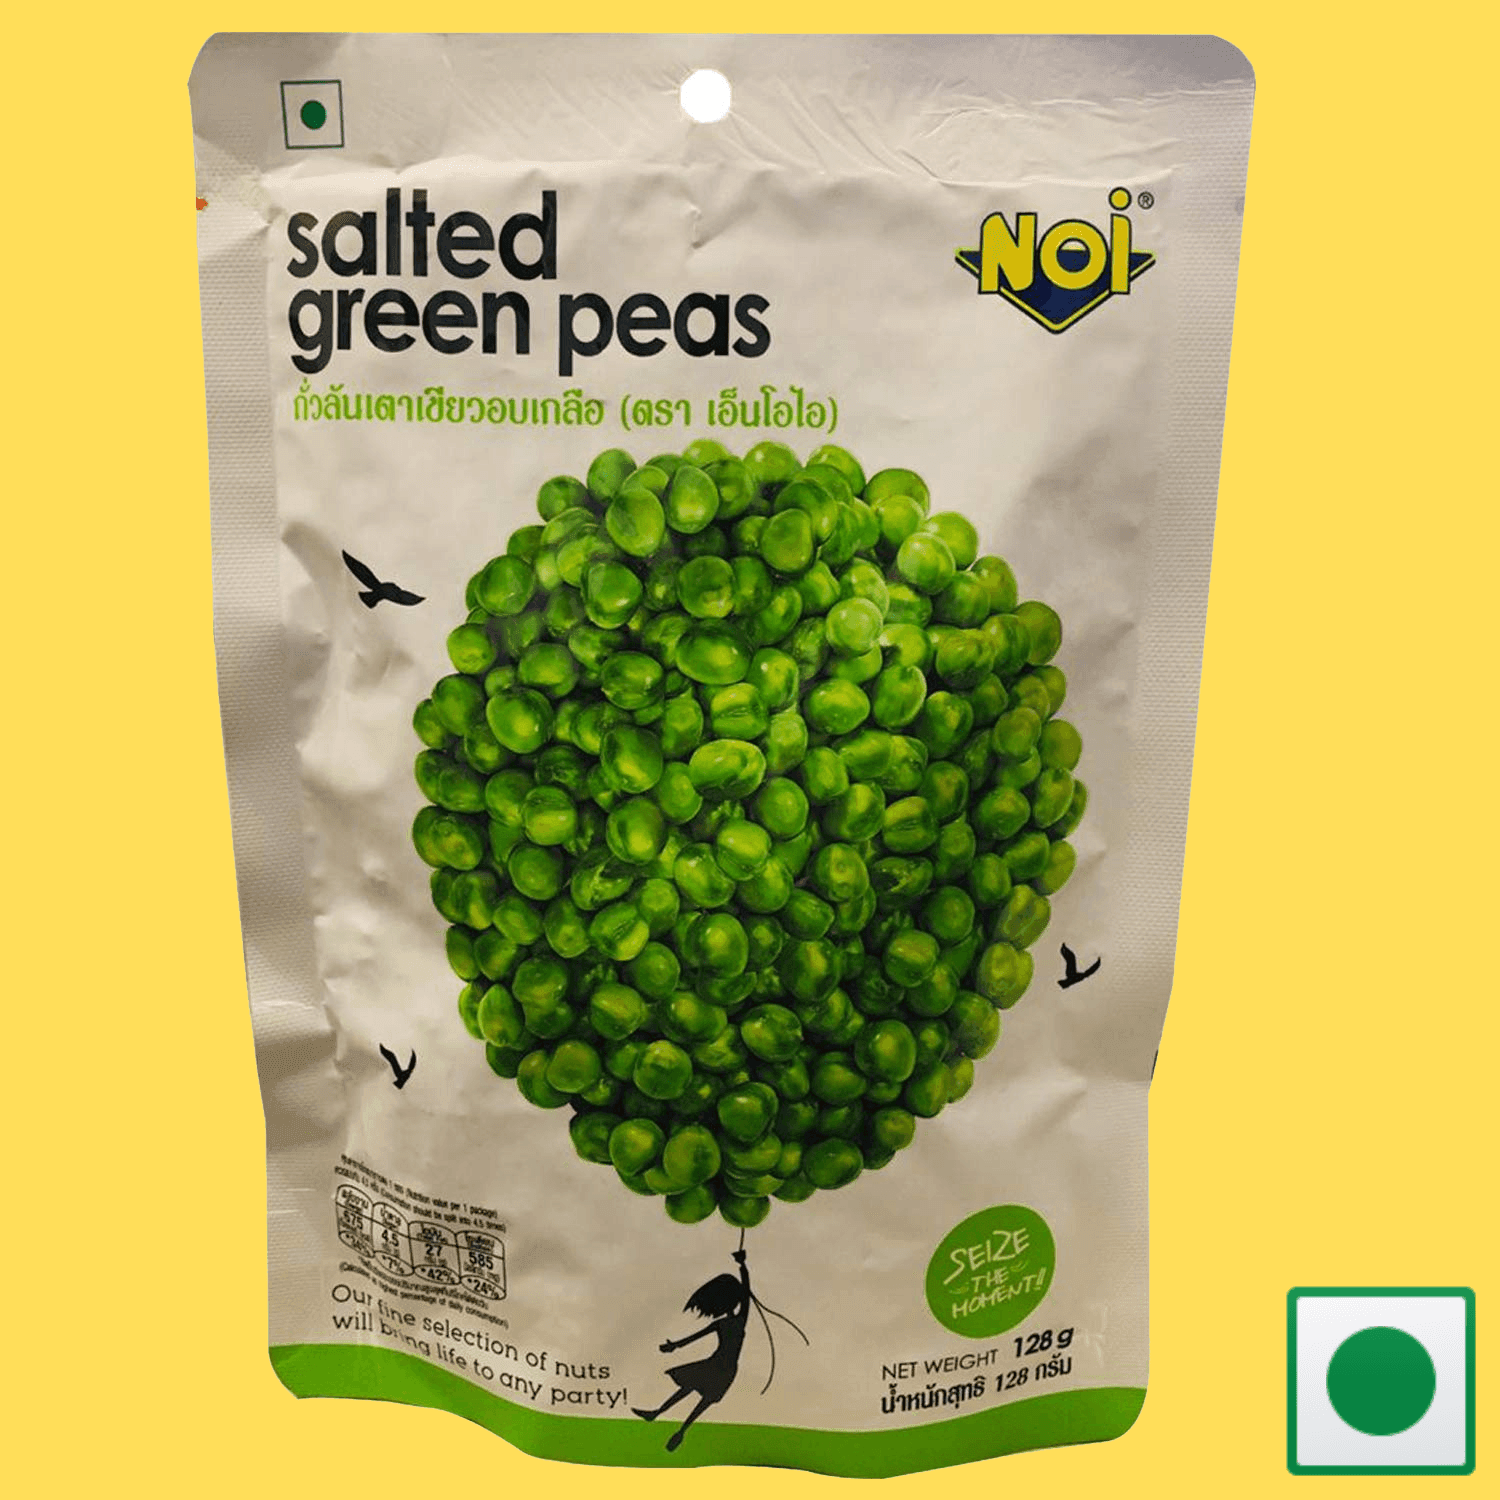 NOI Salted Green Peas Pouch, 128 g (IMPORTED) - Super 7 Mart